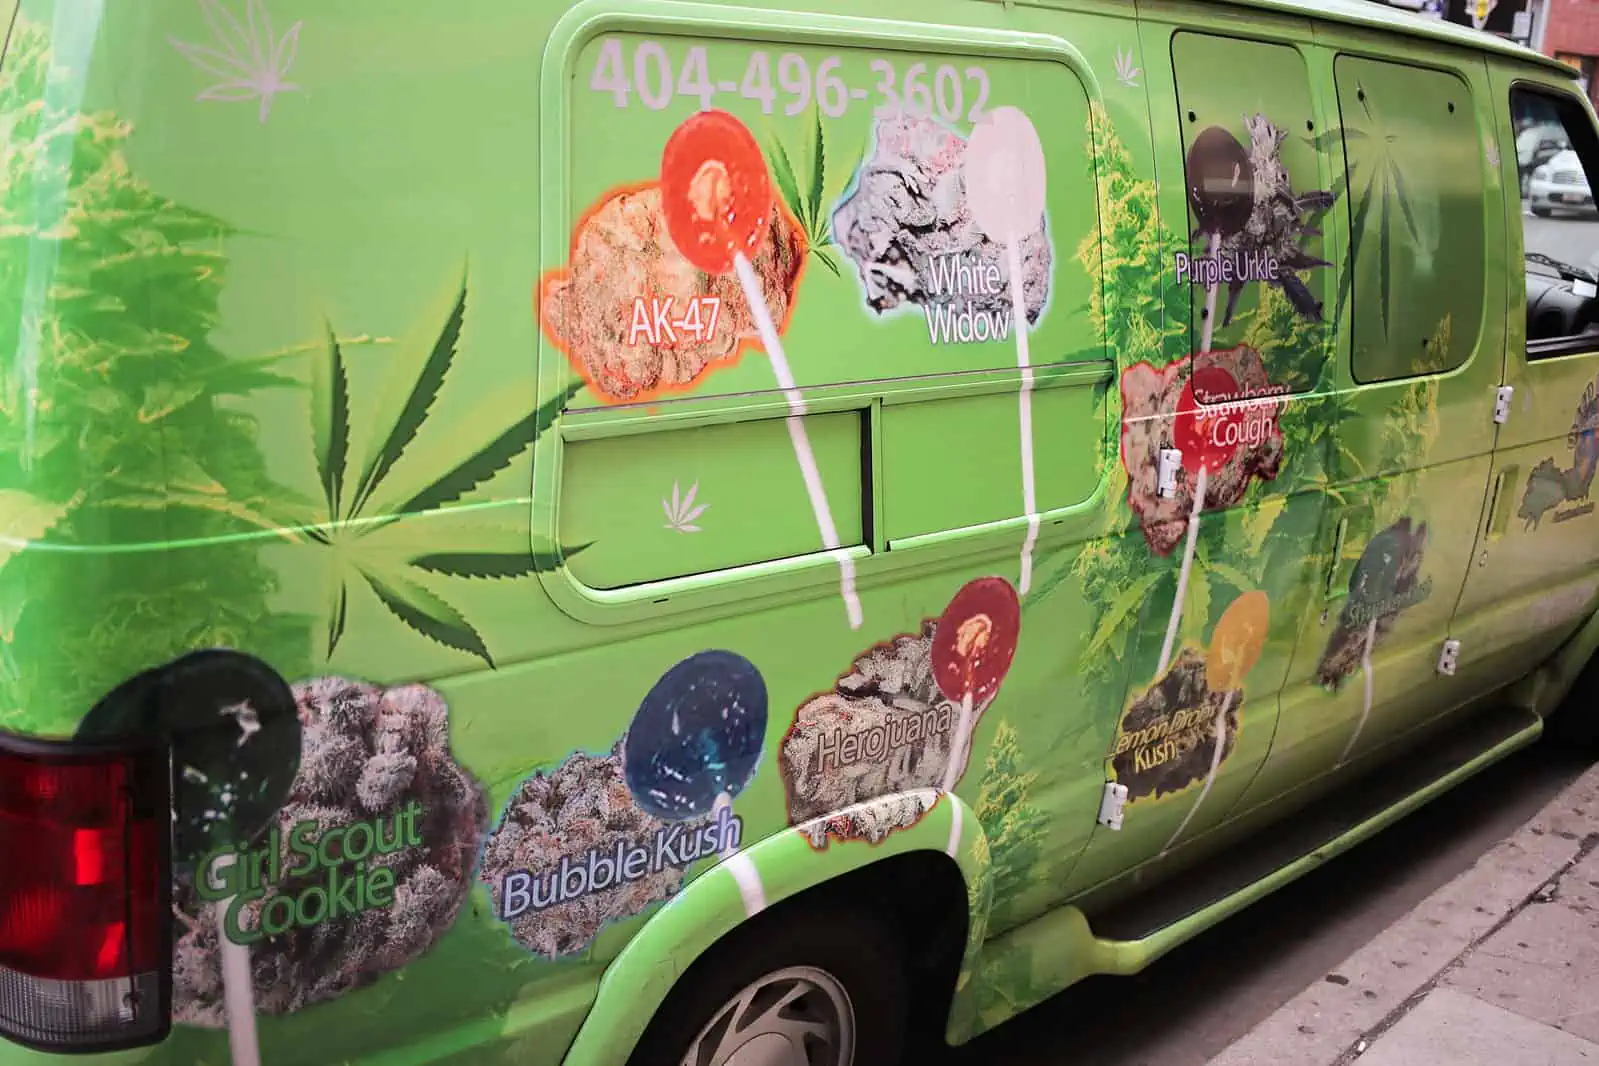 What is up with Weed World Candies and Trucks?